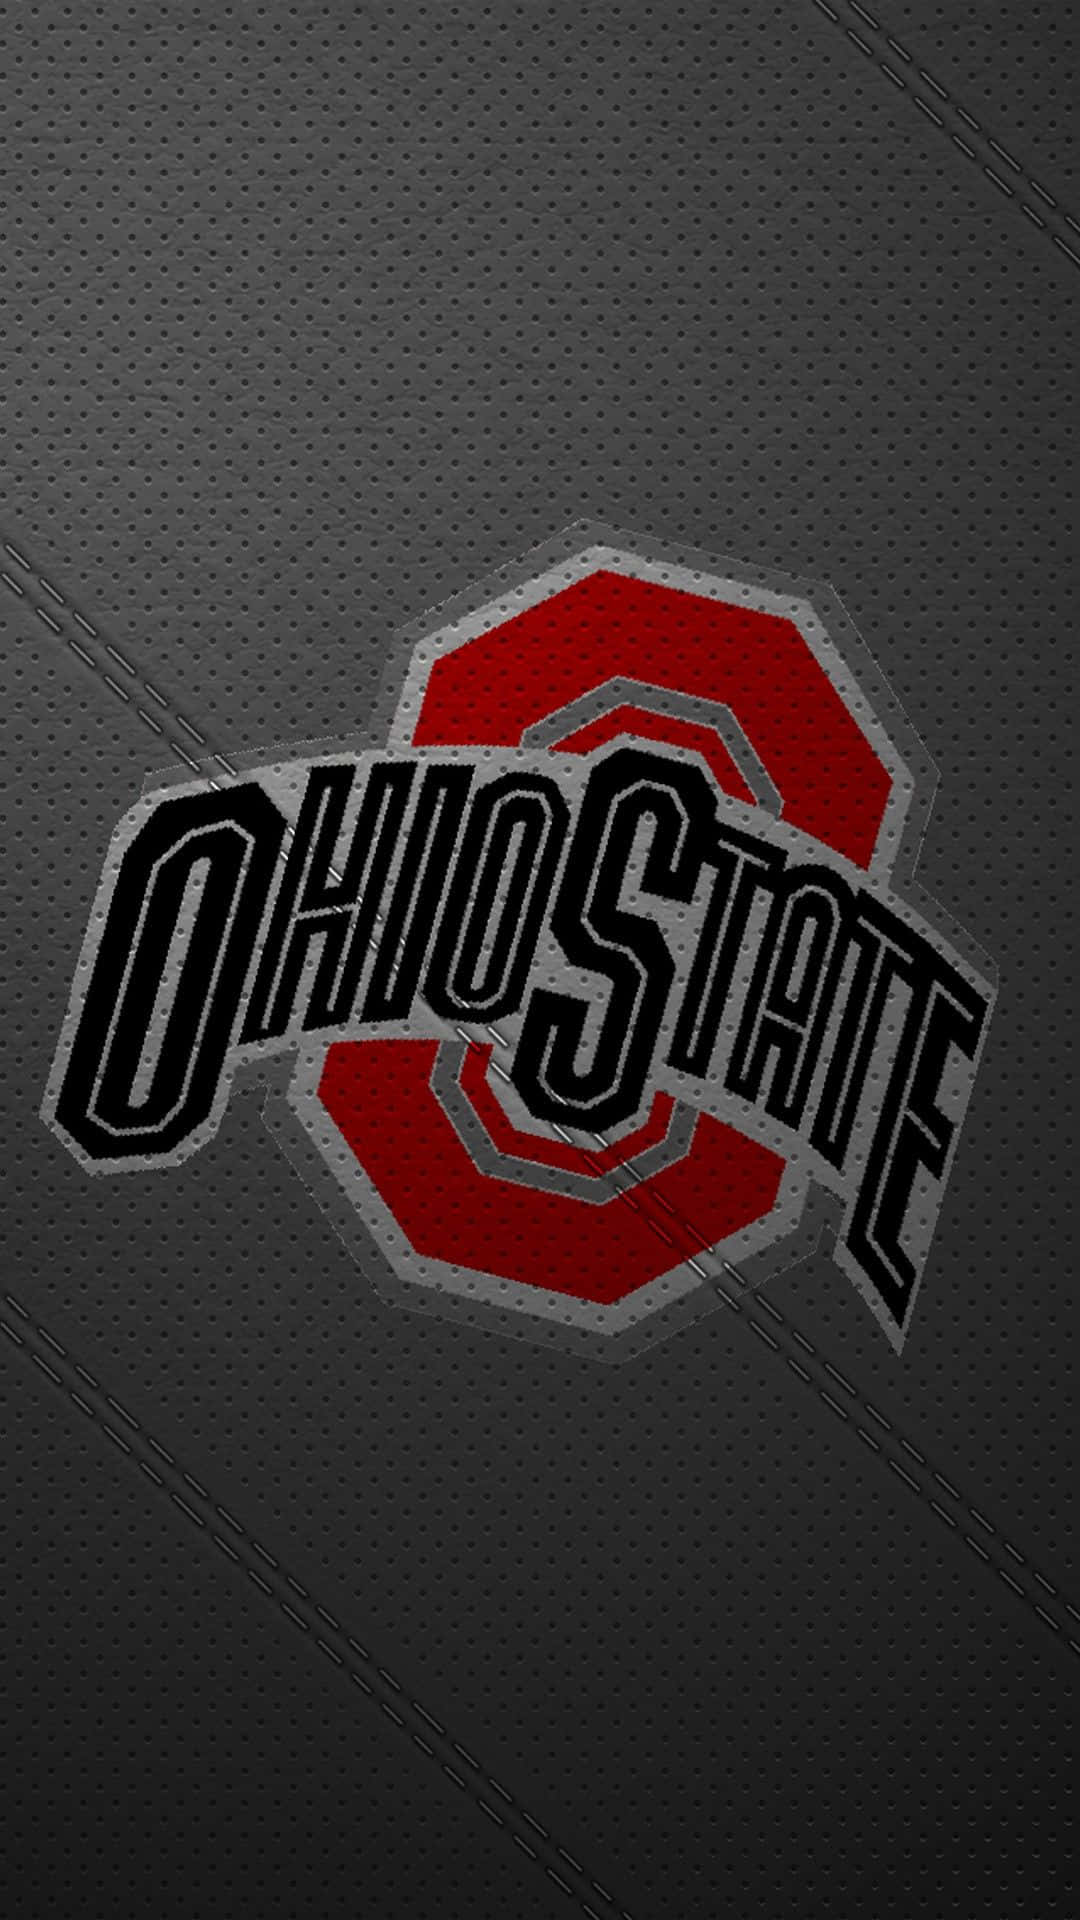 Ohio State Football IPhone Jersey Textile Texture Wallpaper